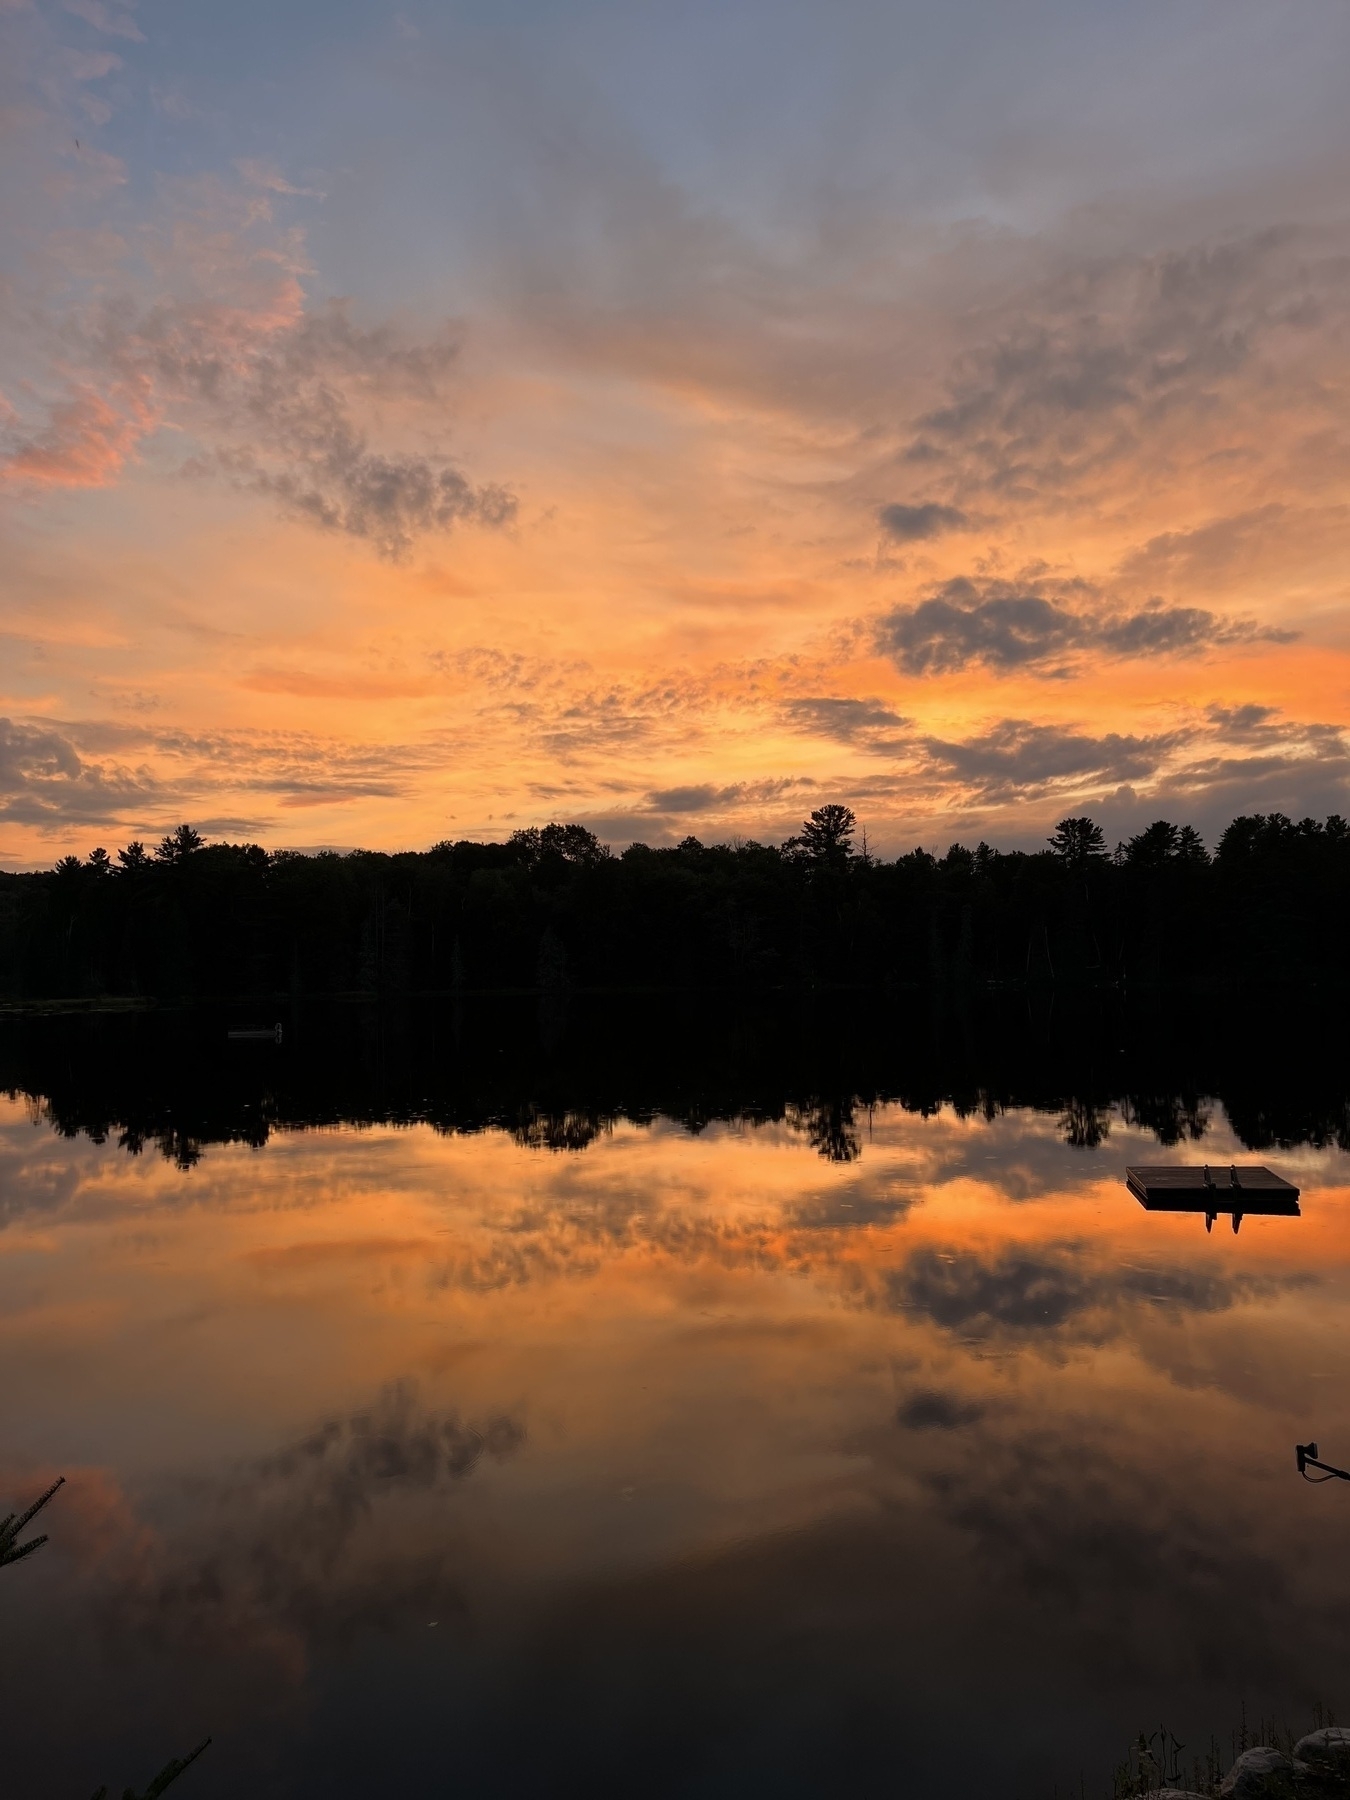 A vivid sunset with orange and blue hues reflects on a calm lake, featuring silhouetted trees and a small dock.